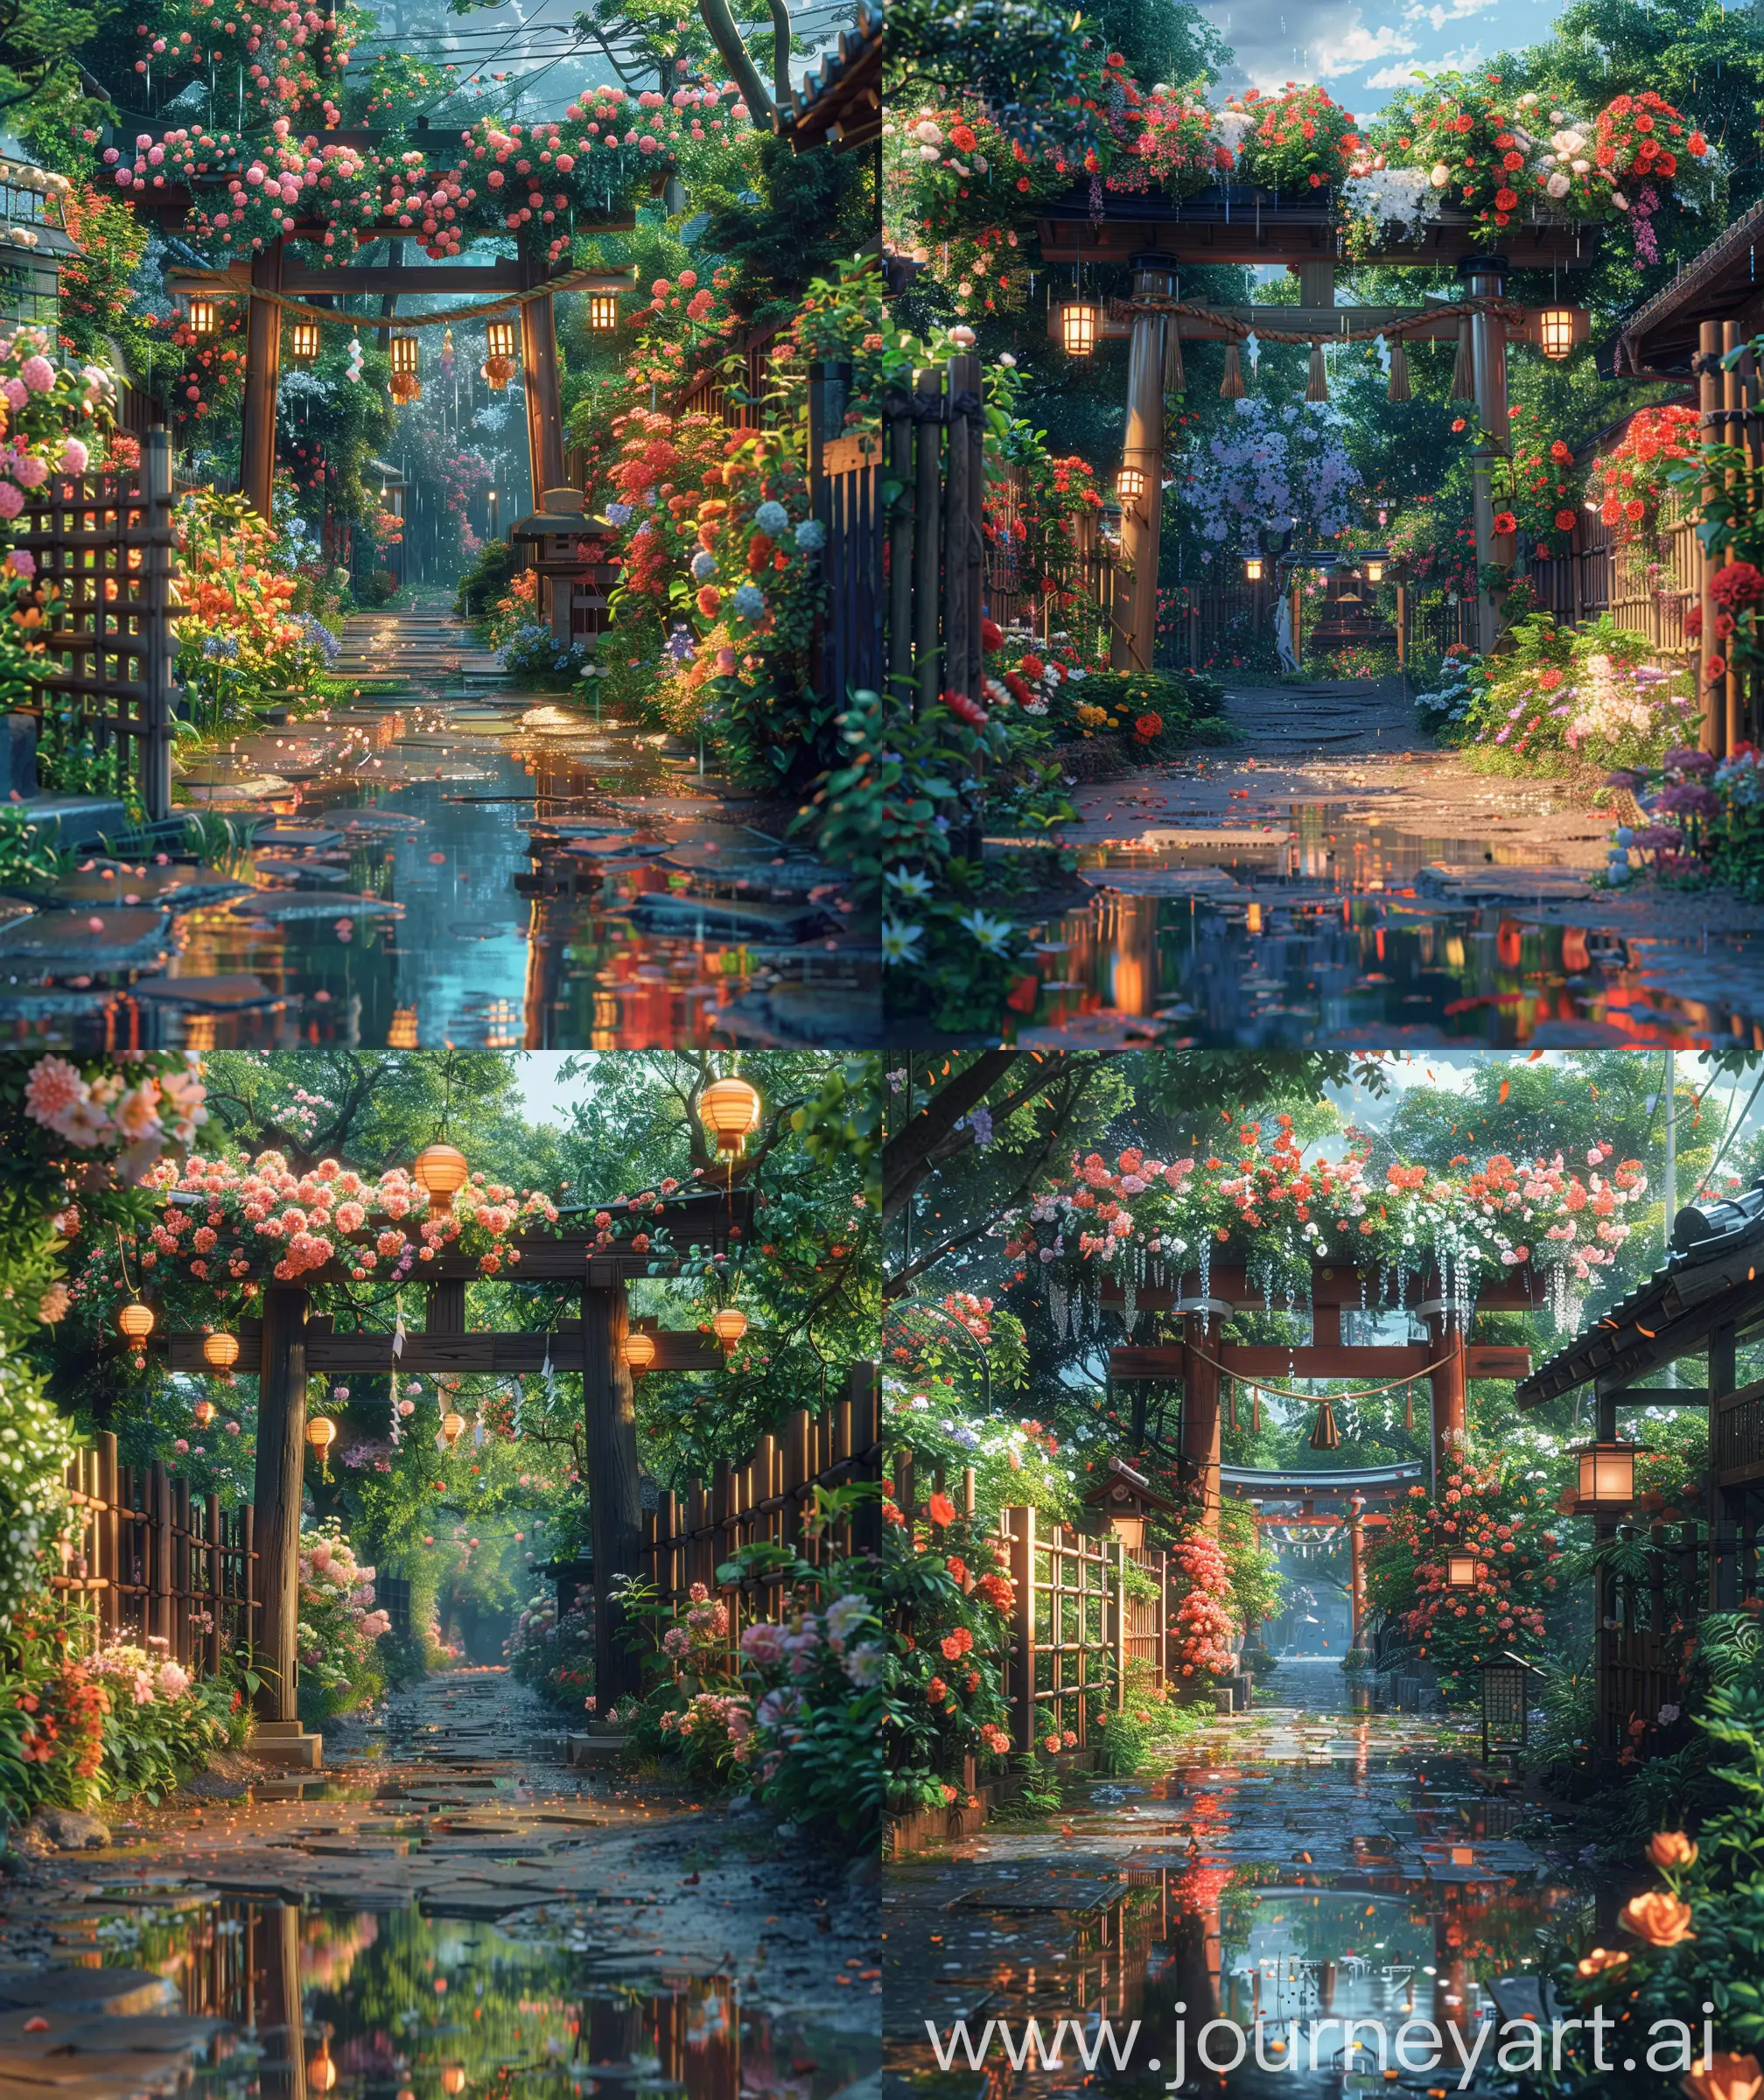 Anime scenary, illustration, mokoto shinkai and Ghibli style mix, direct front facade view of tori gate , cover with beautiful flowers, hanging lights from tori, water puddle reflection, fence, stone path lead to tori gate, beautiful view, verious flowers, ultra HD, high quality, sharp details no hyperrealistic --ar 27:32 --s 400